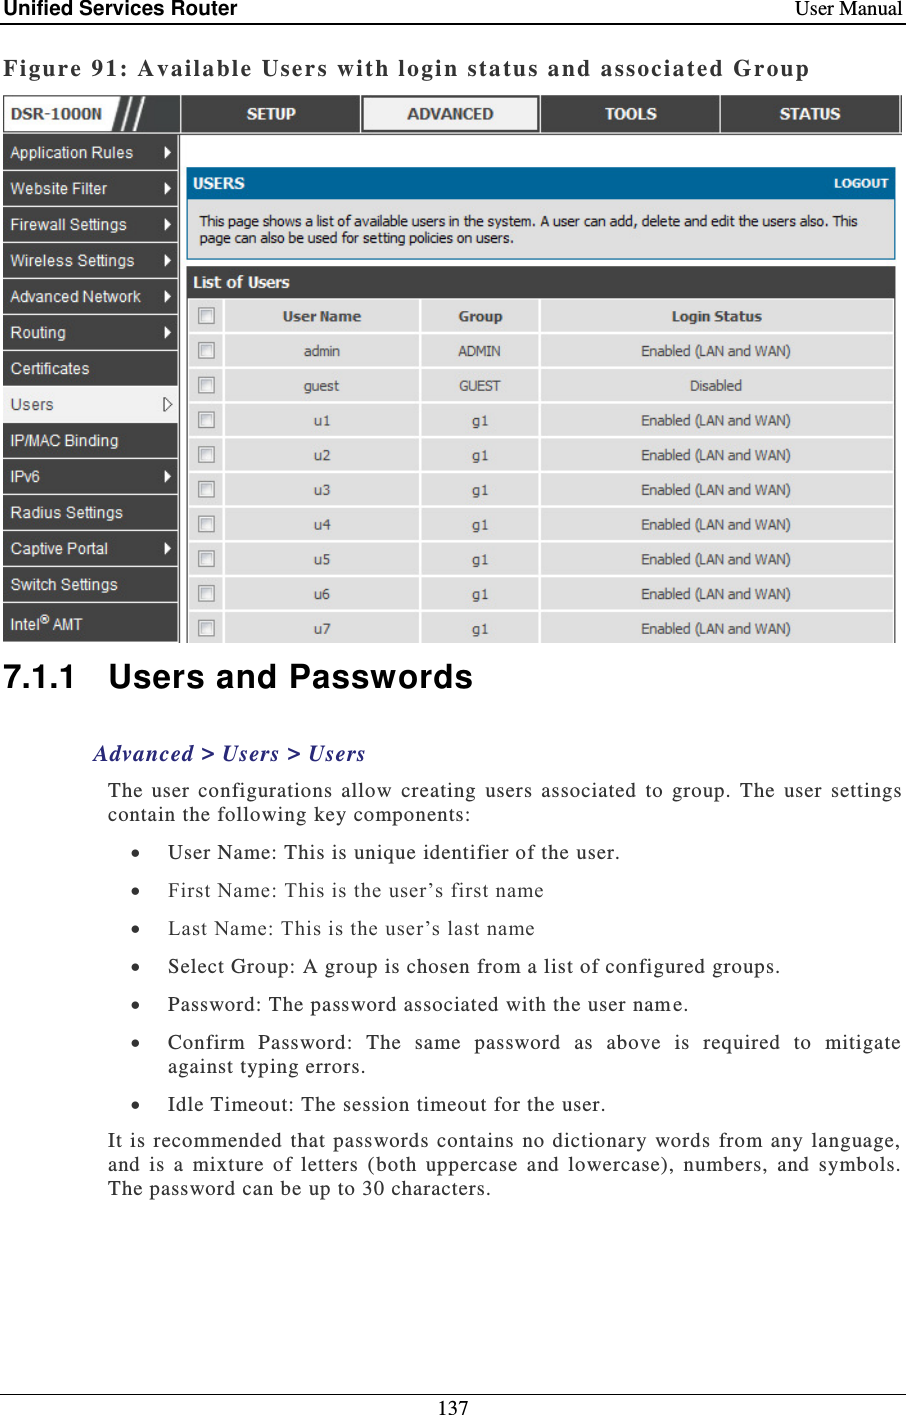 Unified Services Router    User Manual 137  Figure 91: Available Users with logi n status and associated Group   7.1.1 Users and Passwords Advanced &gt; Users &gt; Users  The  user  configurations  allow  creating  users  associated  to  group.  The  user  settings contain the following key components:  User Name: This is unique identifier of the user.   First Name: This is the user’s first name   Last Name: This is the user’s last name   Select Group: A group is chosen from a list of configured groups.   Password: The password associated with the user nam e.   Confirm  Password:  The  same  password  as  above  is  required  to  mitigate against typing errors.    Idle Timeout: The session timeout for the user. It is  recommended  that  passwords contains  no  dictionary  words  from any language, and  is  a  mixture  of  letters  (both  uppercase  and  lowercase),  numbers,  and  symbols. The password can be up to 30 characters.  